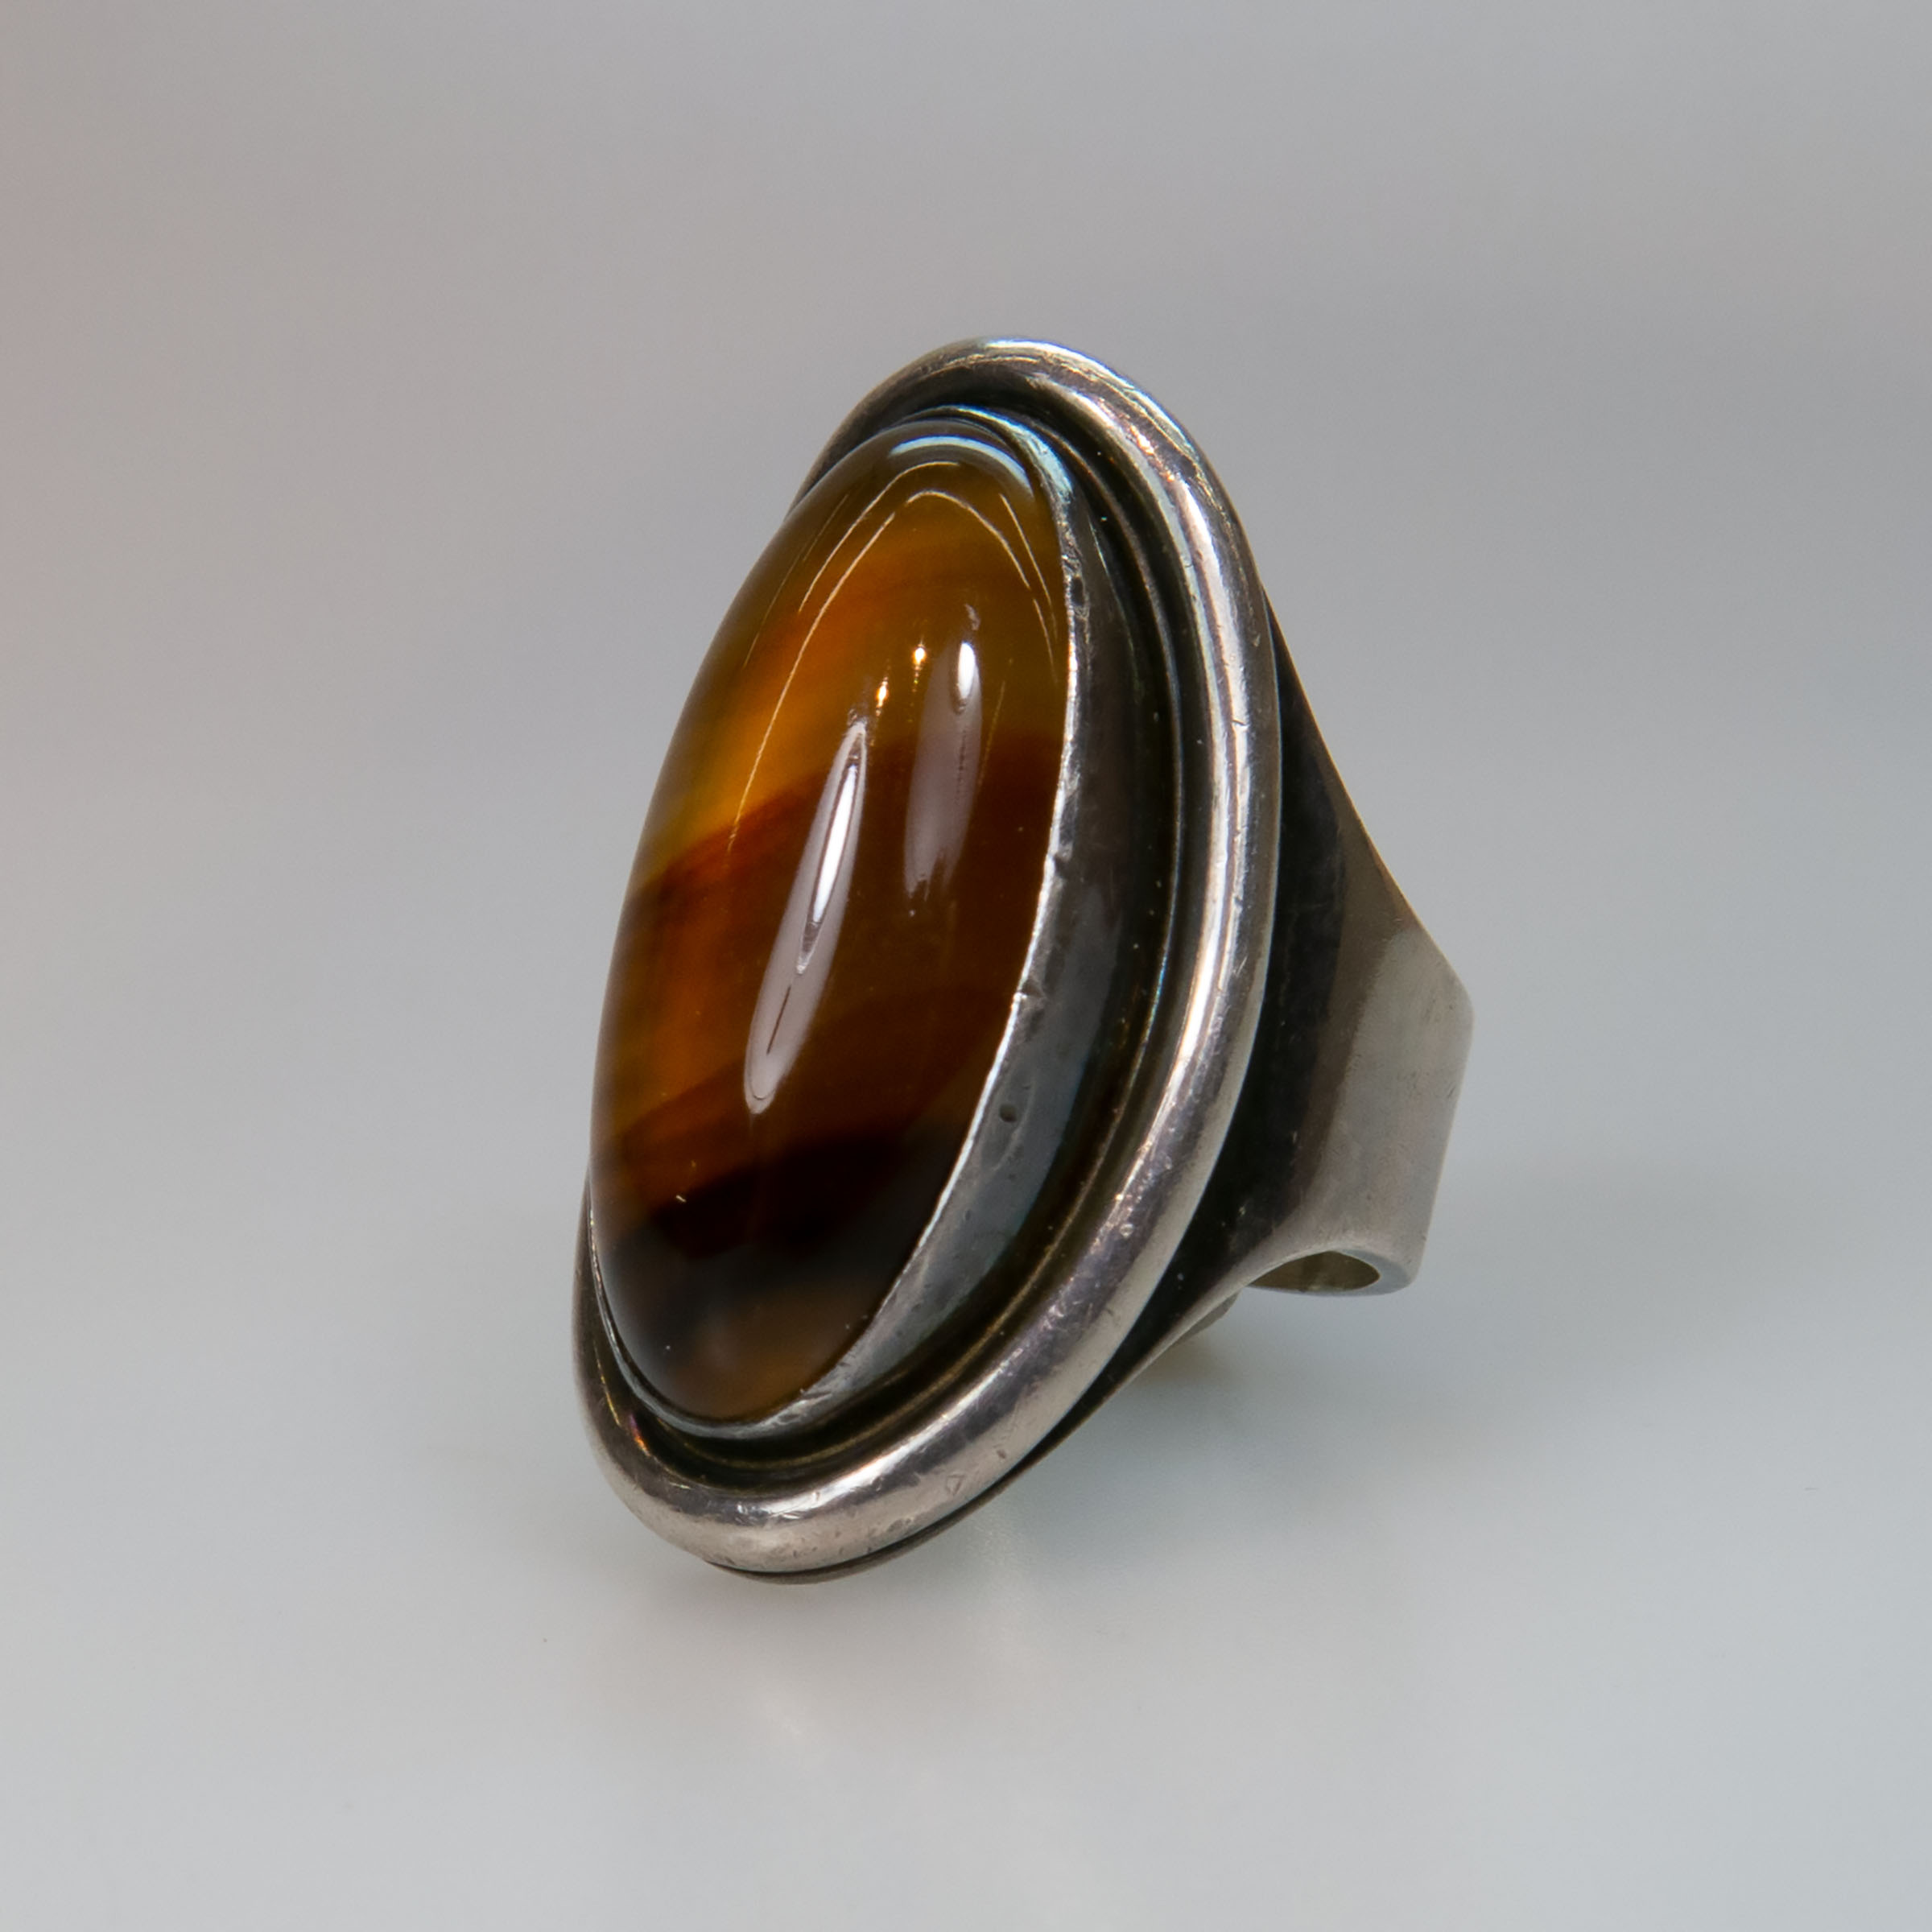 Darla Hesse Canadian Sterling Silver Ring